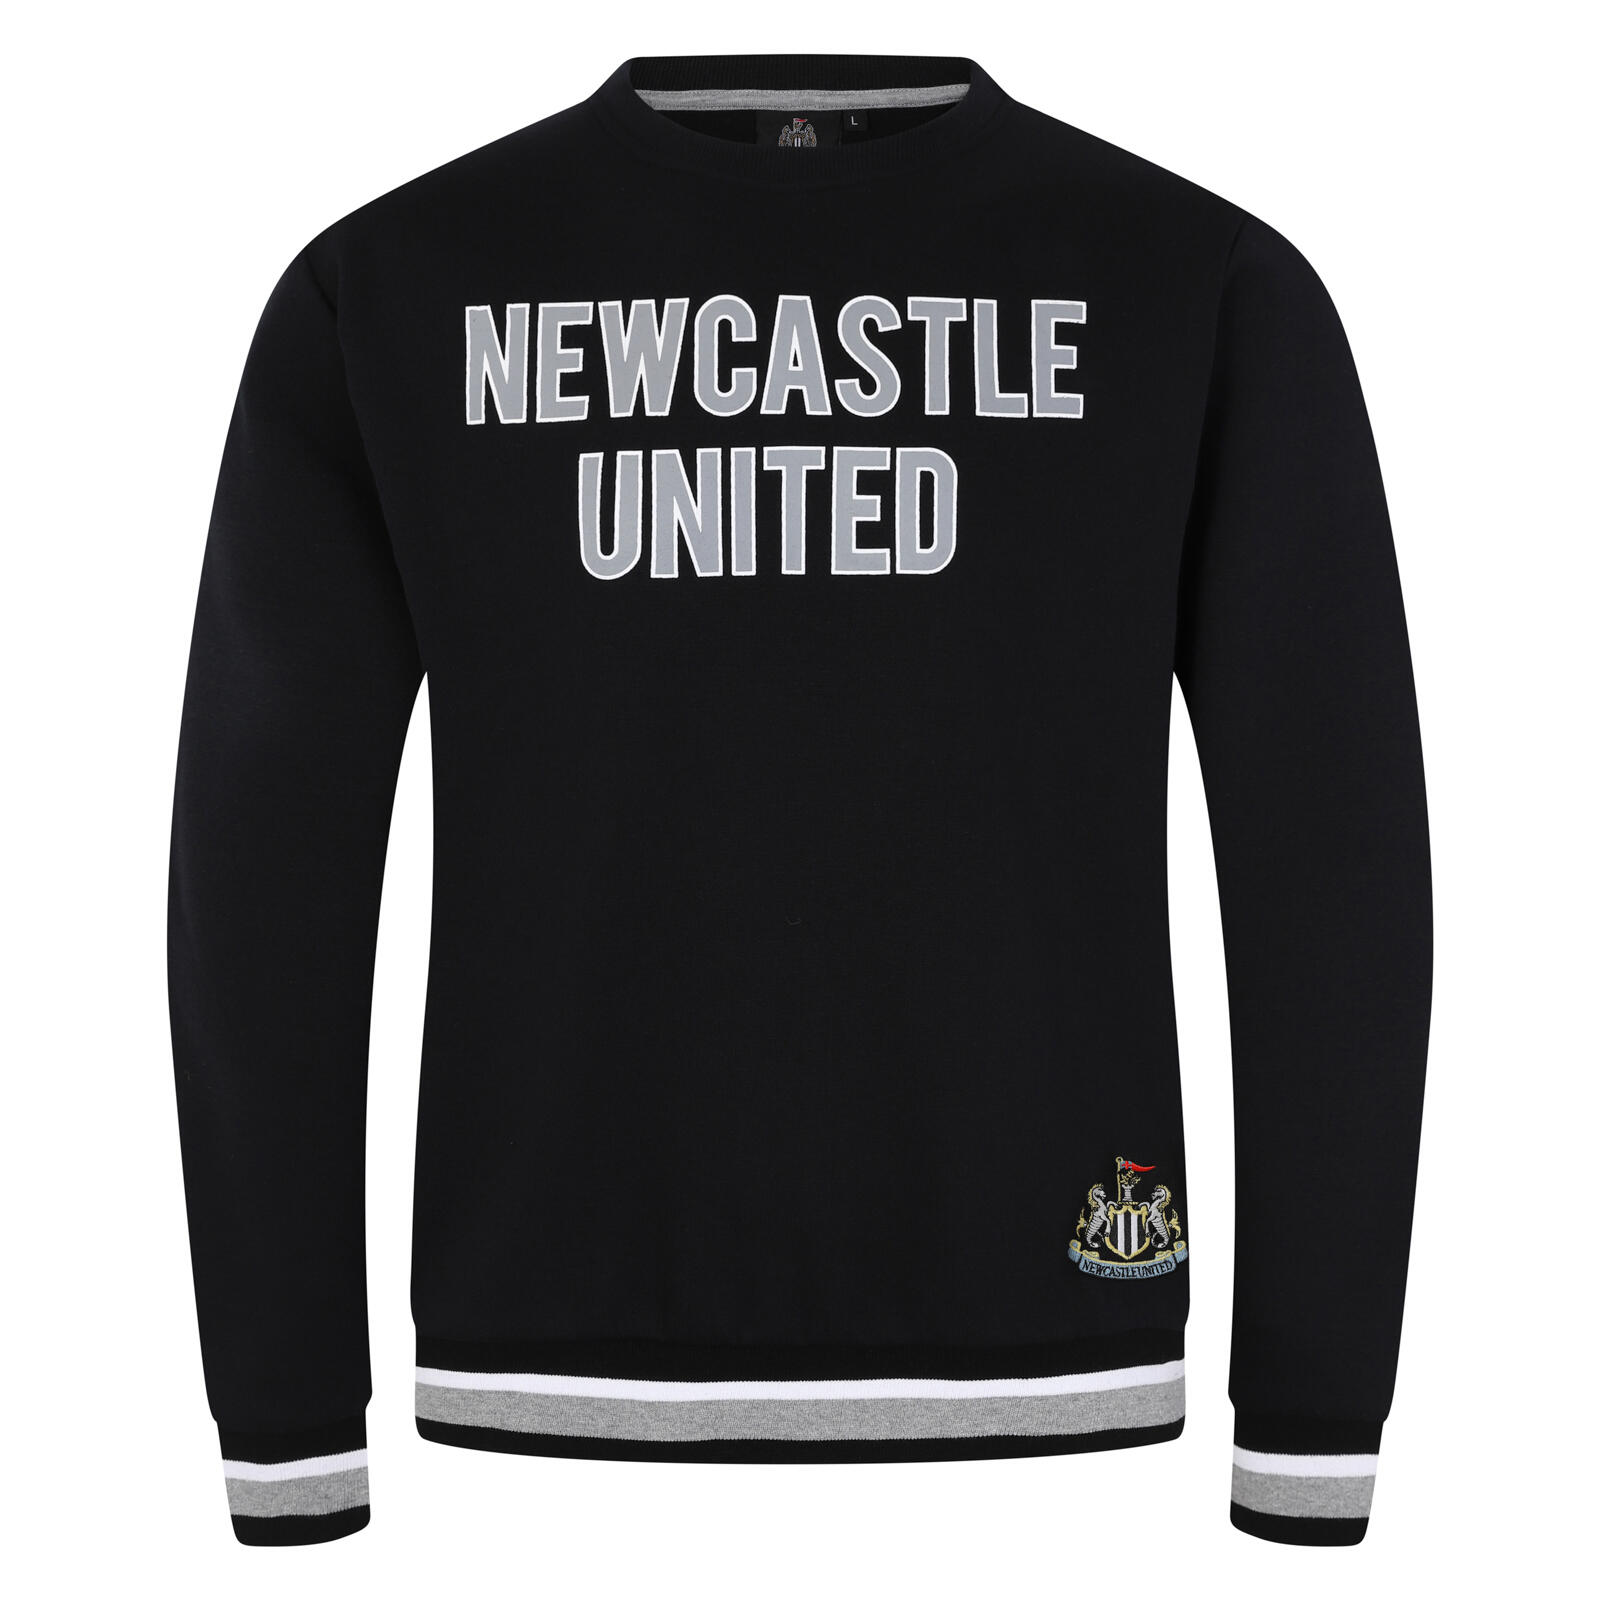 NEWCASTLE UNITED Newcastle United Mens Sweatshirt Graphic Top FC OFFICIAL Football Gift